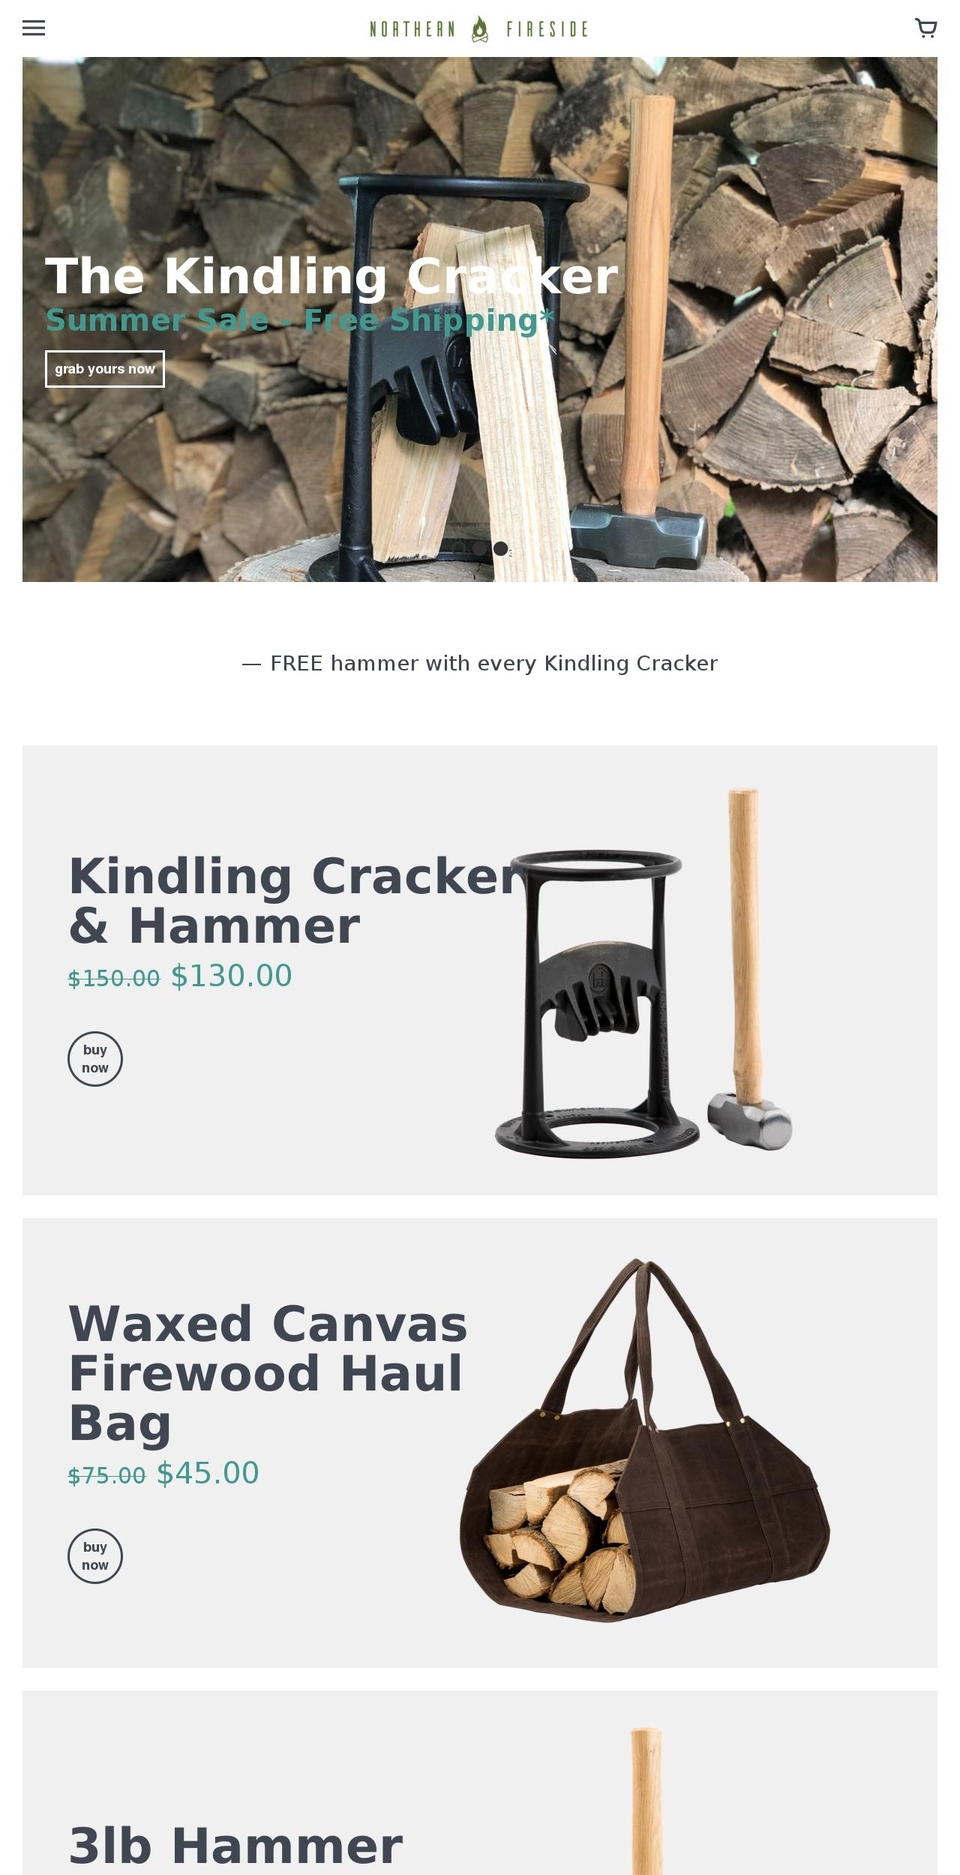 North Shopify theme site example northernfireside.com